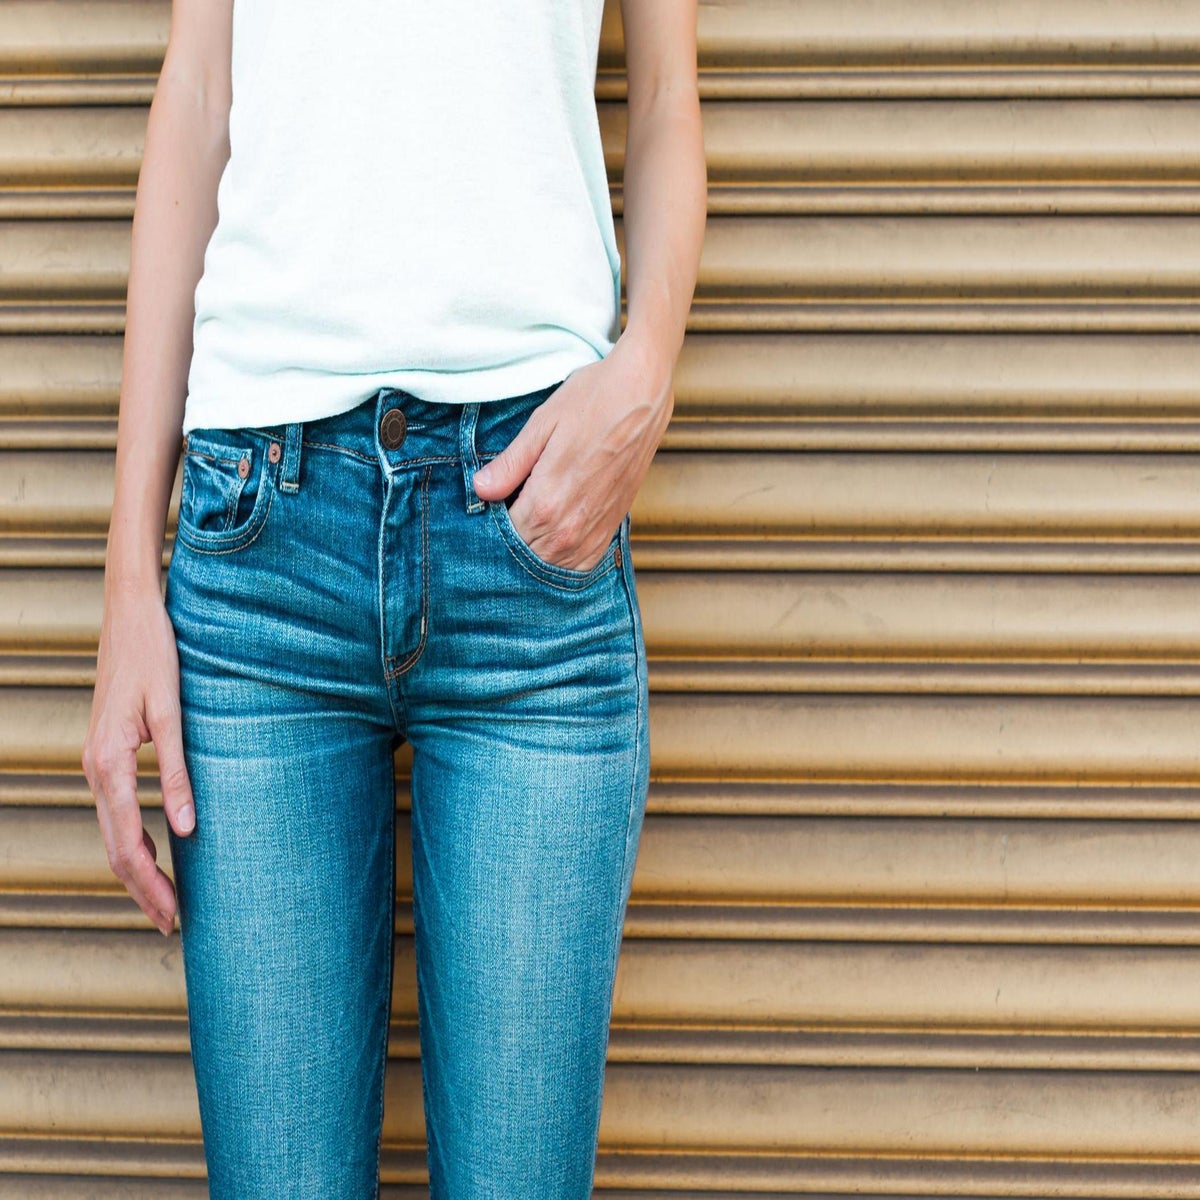 This is why women love wearing men's pants, according to study, indy100